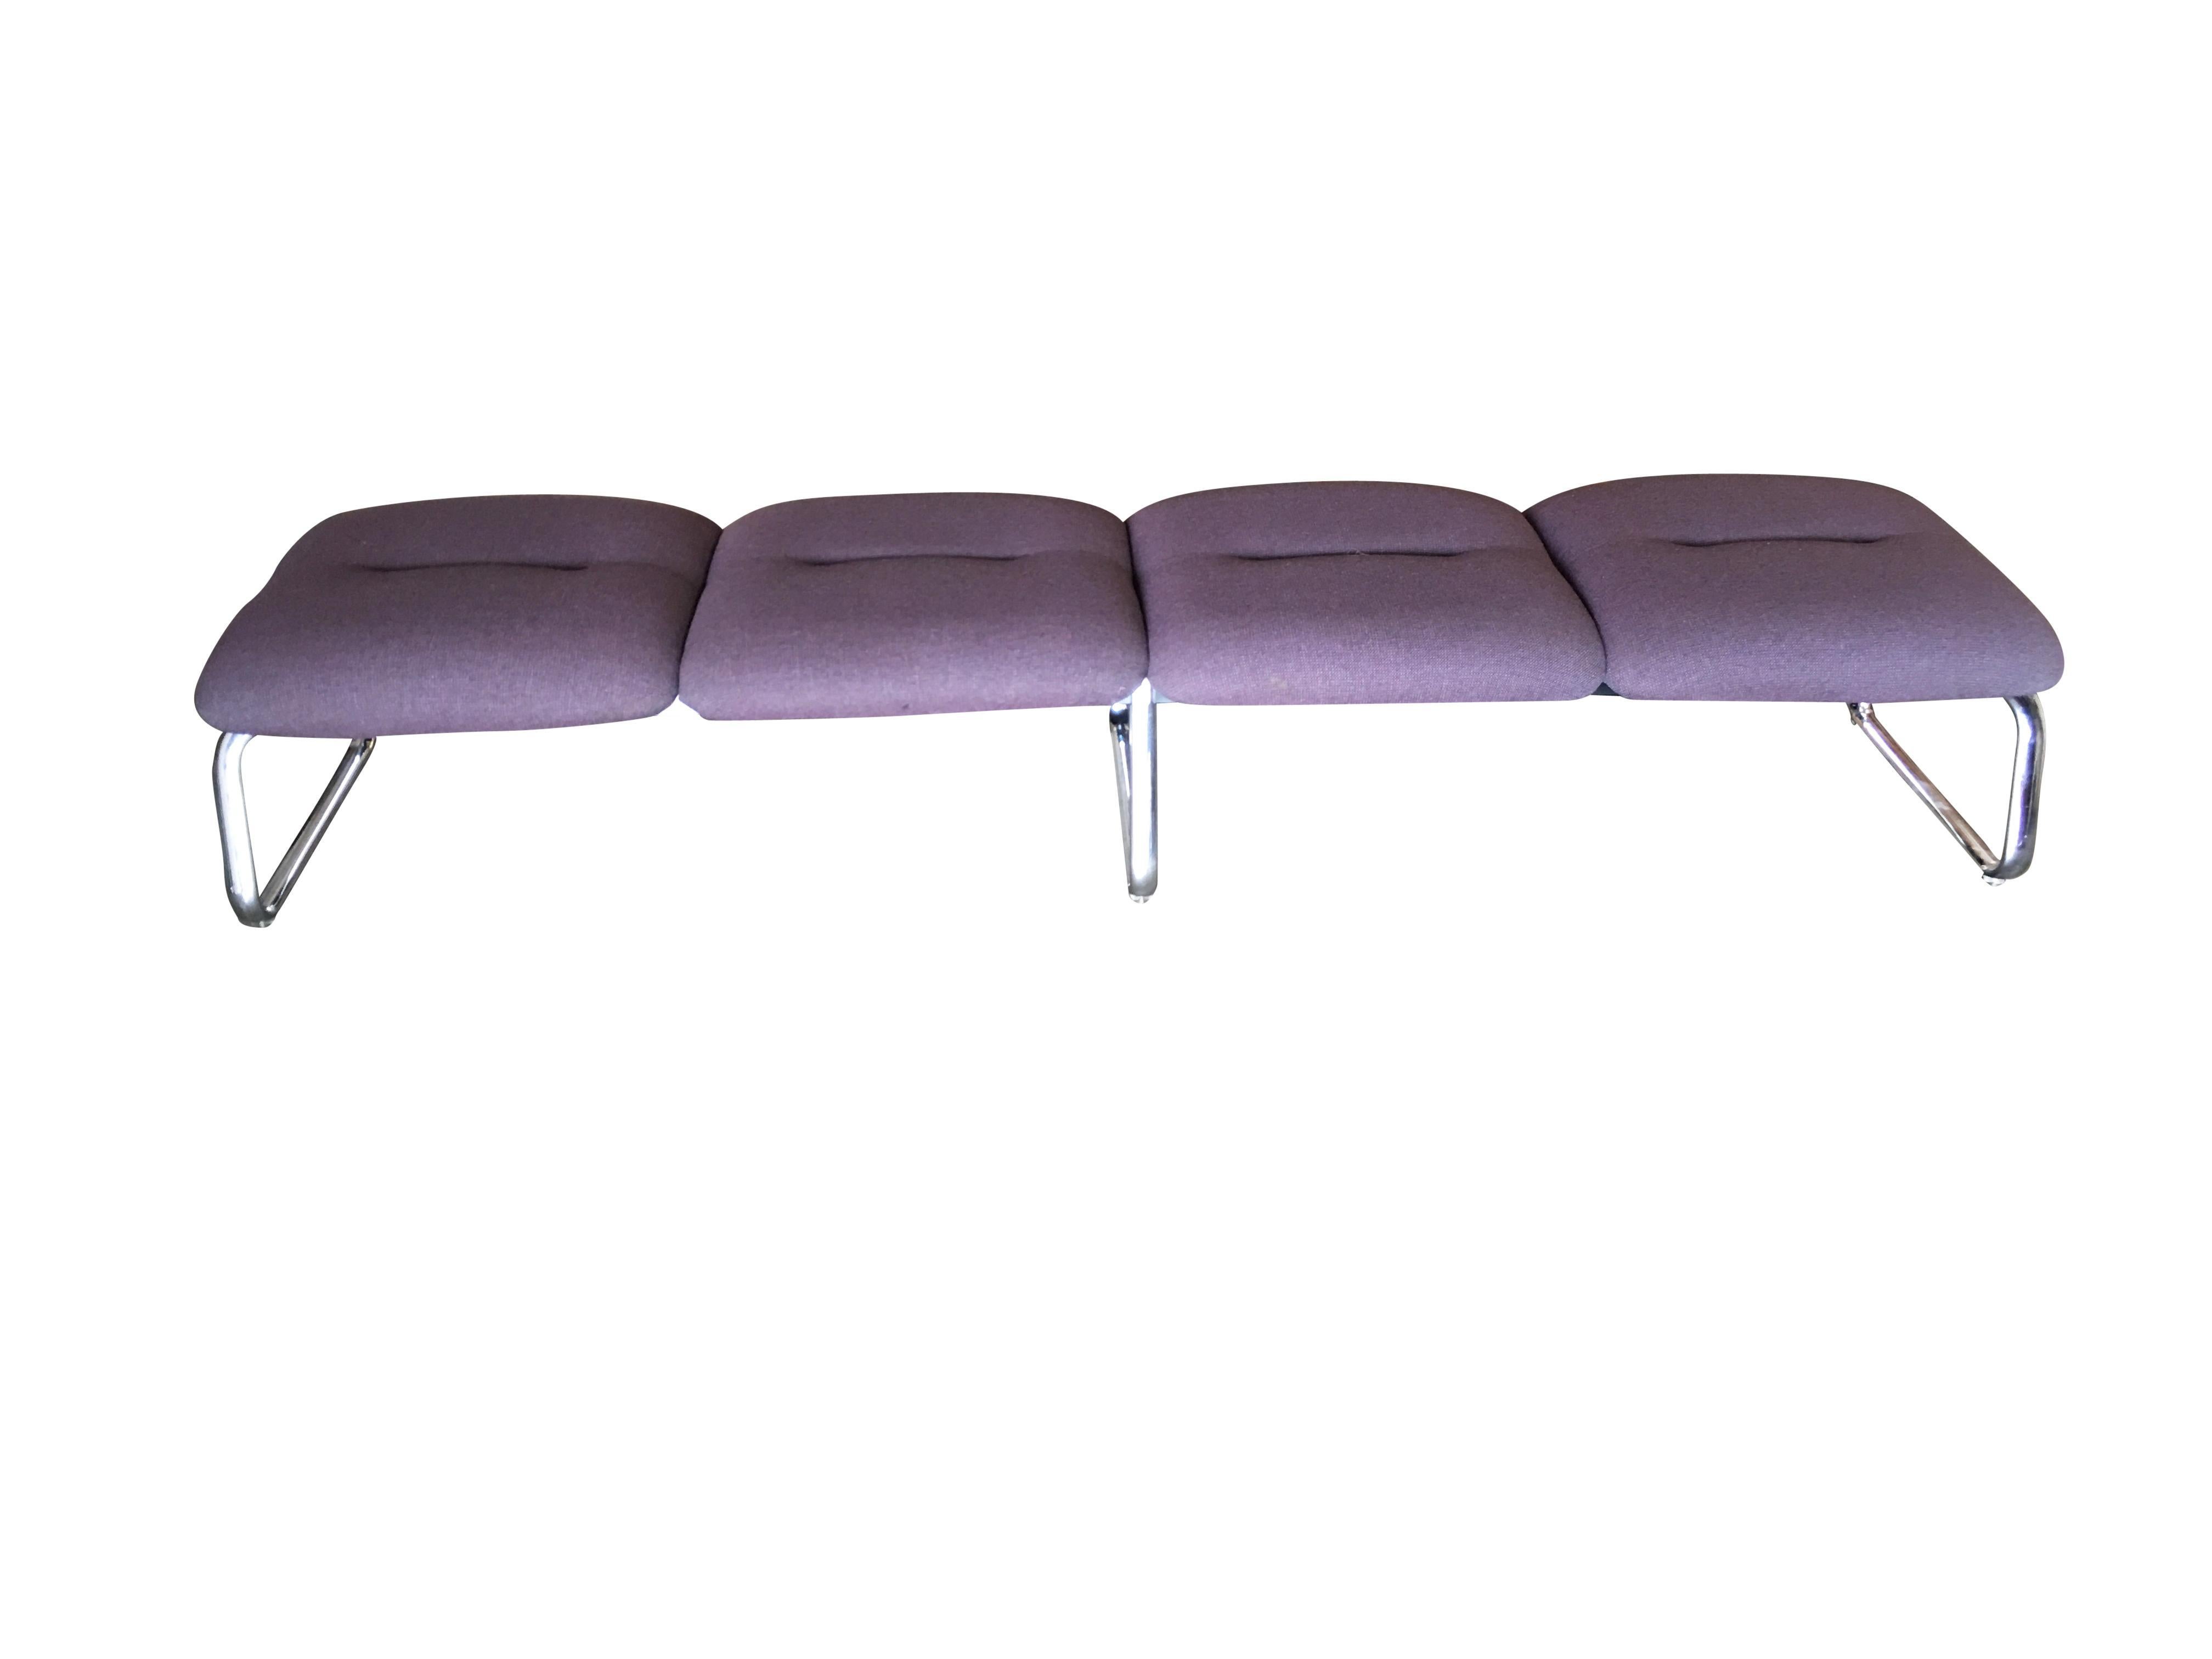 Chrome modernist waiting room bench featuring four purple-colored covered cushion seats fixed to 3-chrome loop style legs. Available- 2, circa 1970s.